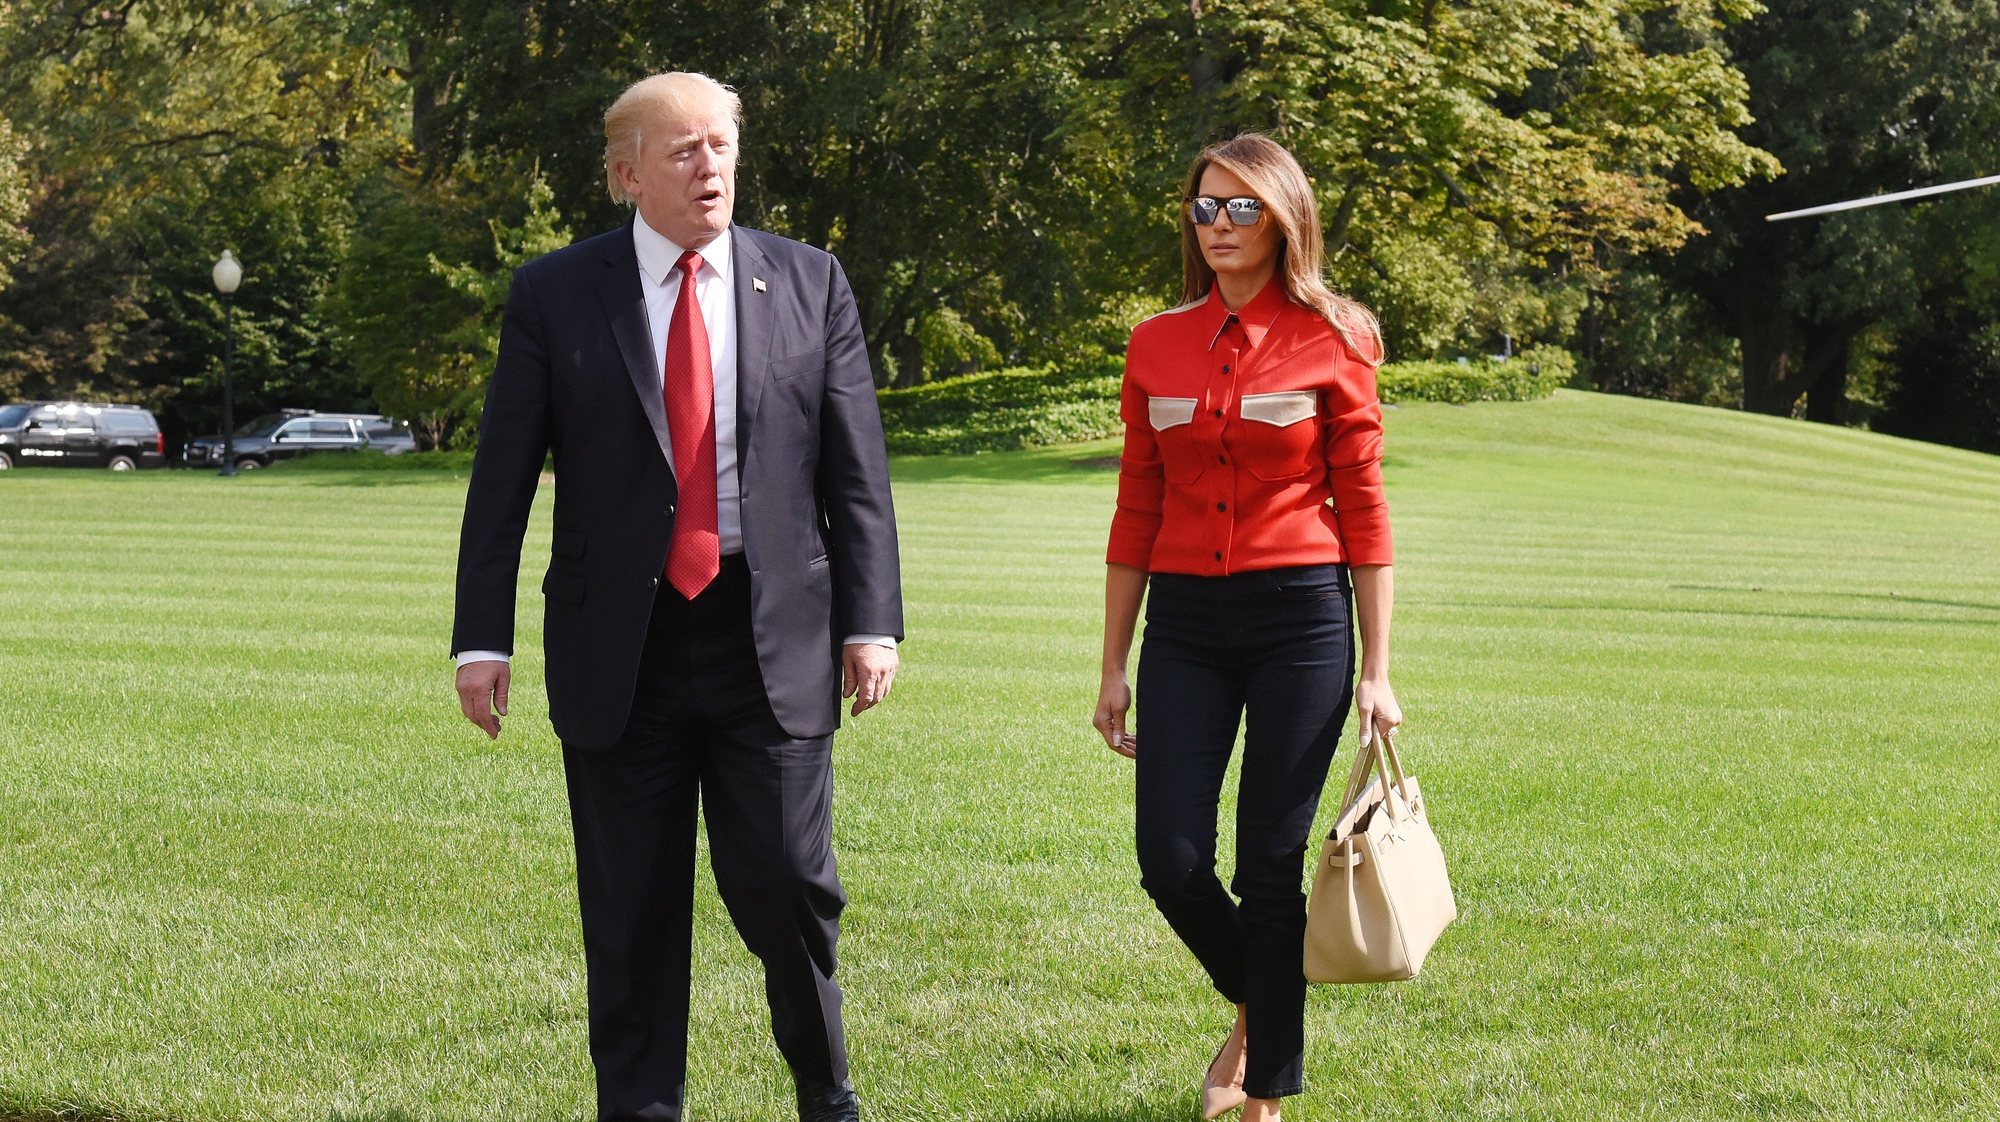 epa06197177 US President Donald J.Trump and First Lady Melanie Trump walk from Marine One upon arrival on the South Lawn of the White House in Washington, DC, USA, 10 September 2017. The president spent the weekend at Camp David, the Presidential retreat in Maryland.  EPA/Olivier Douliery / POOL